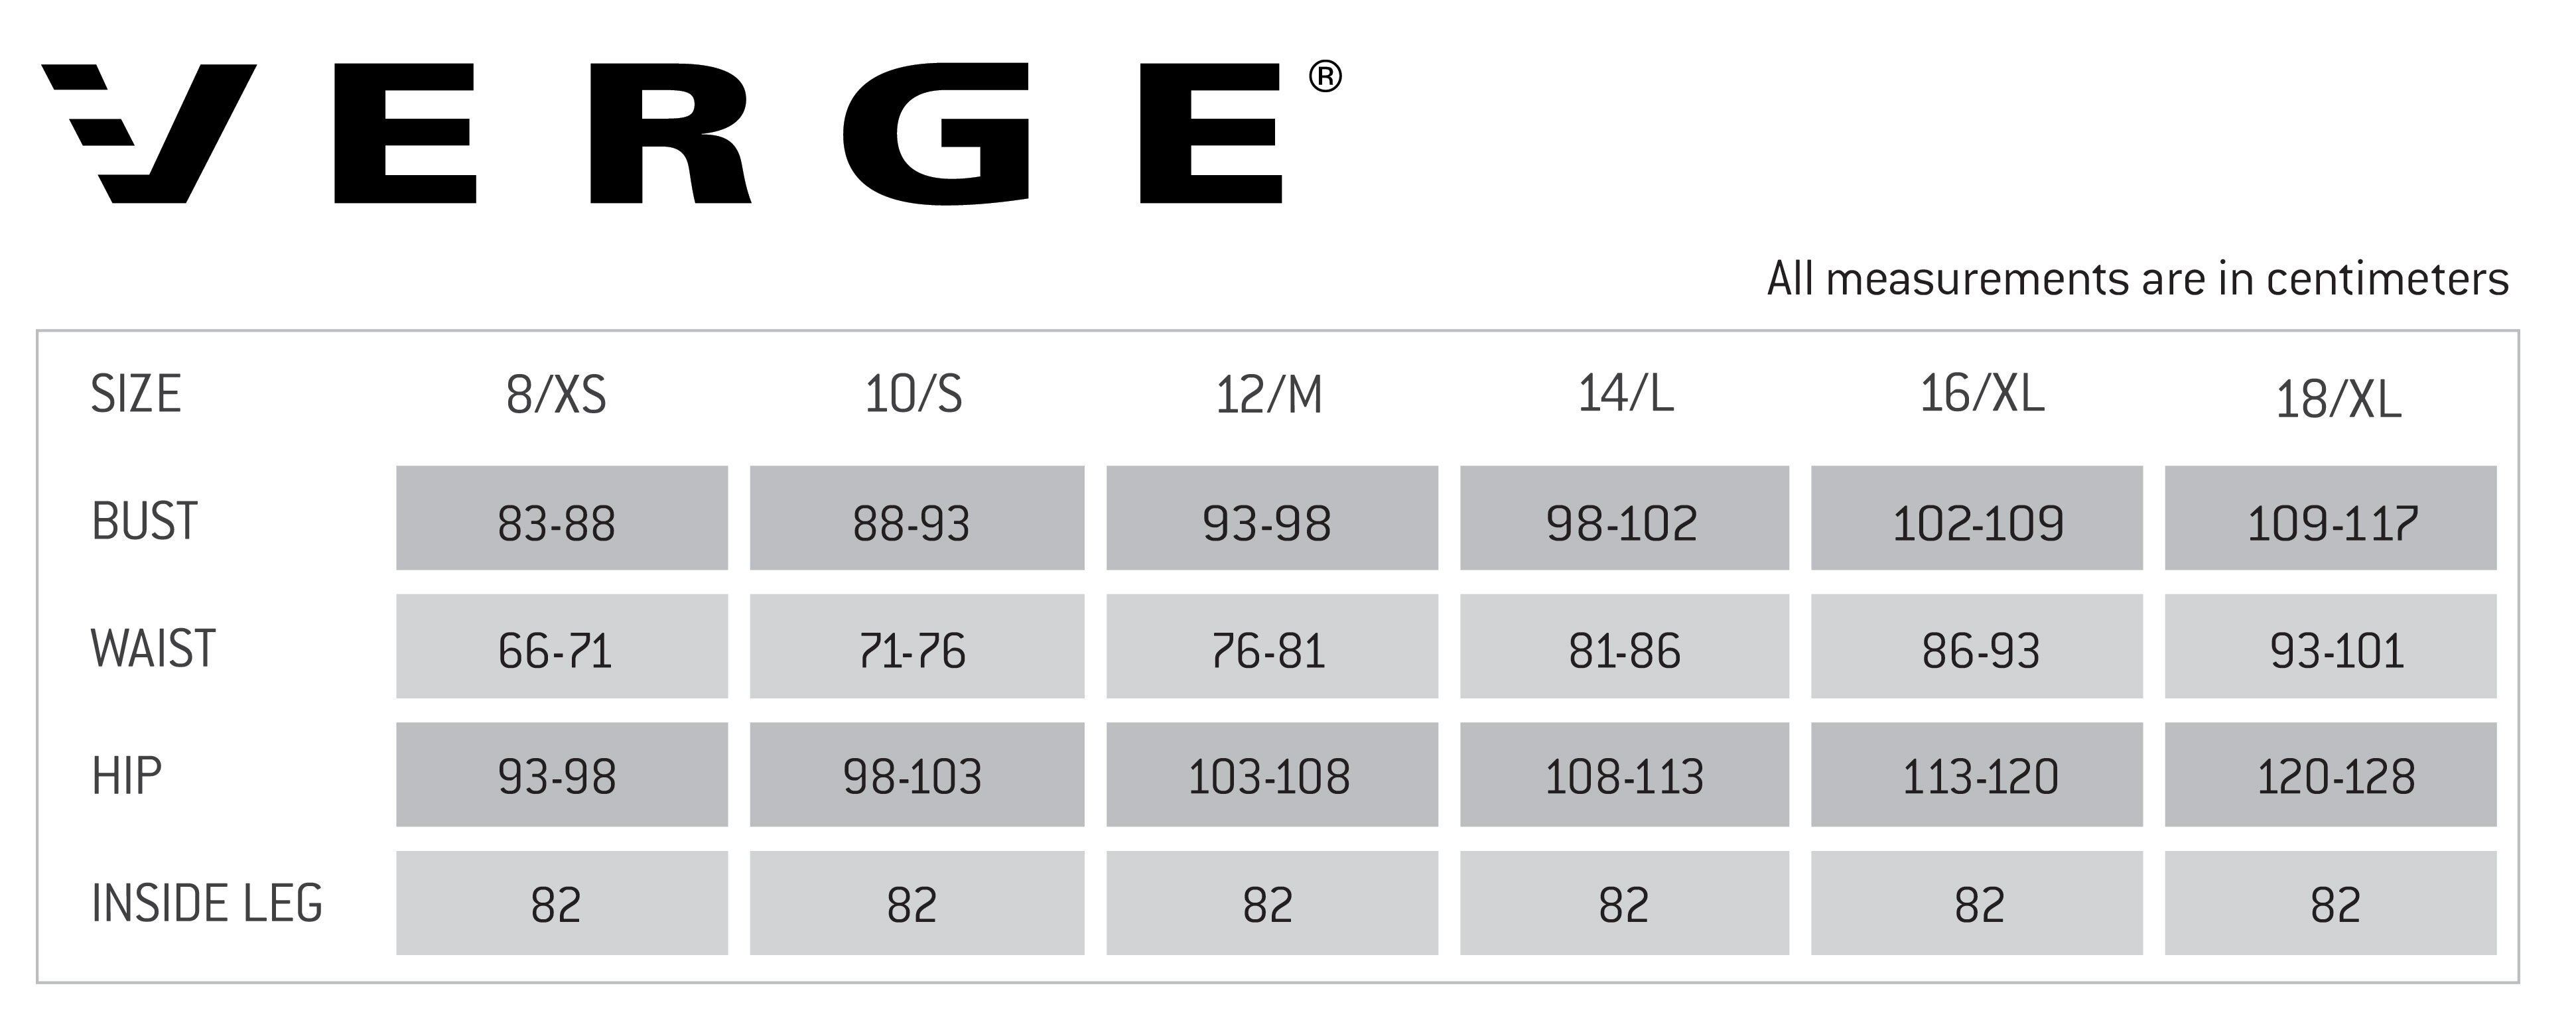 verge sizing guide